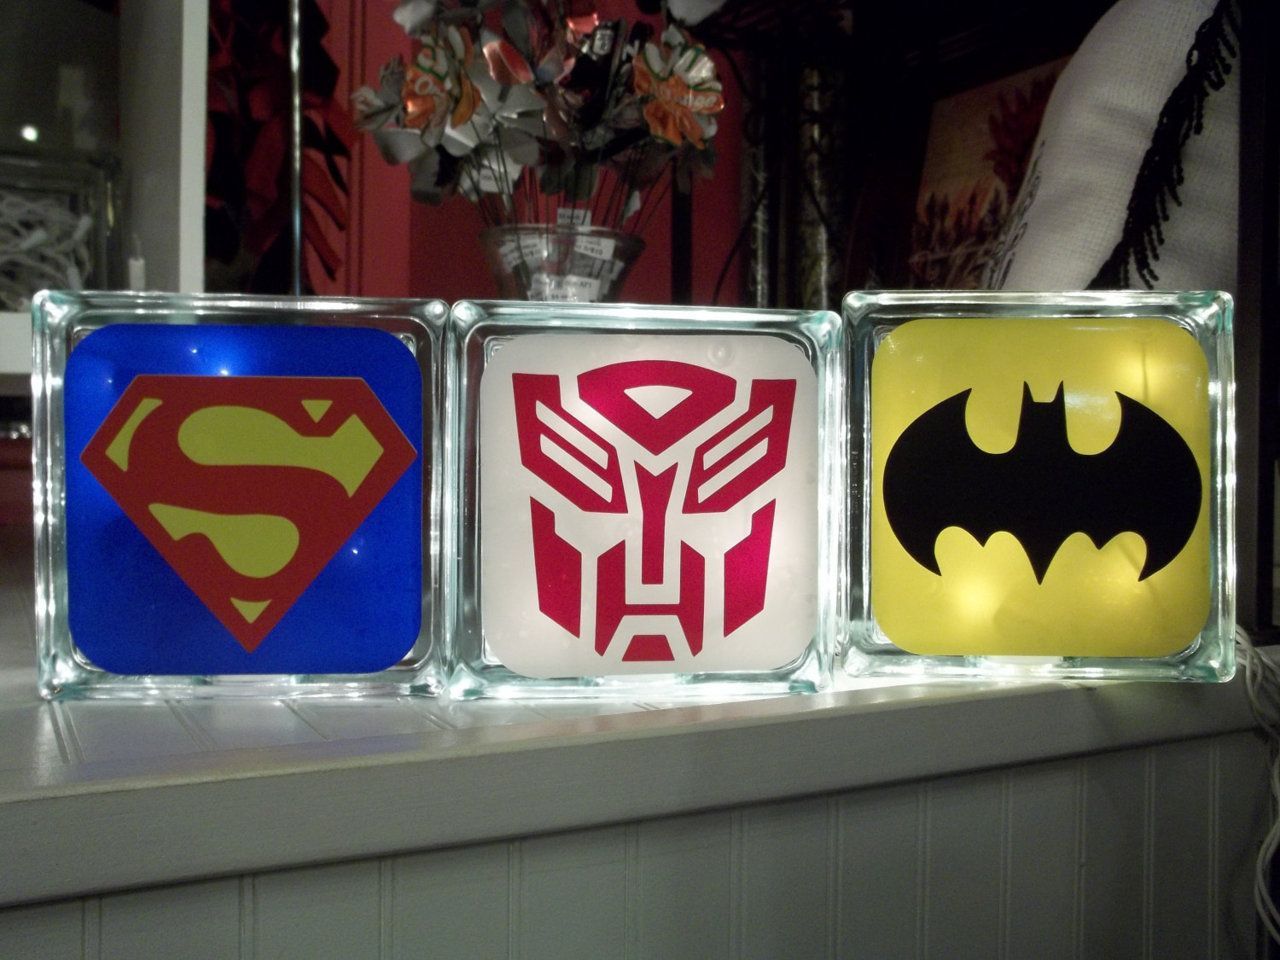 Glass Blocks. @ CelliBaker- I though this could be a pretty cool nightlight for the kiddos.